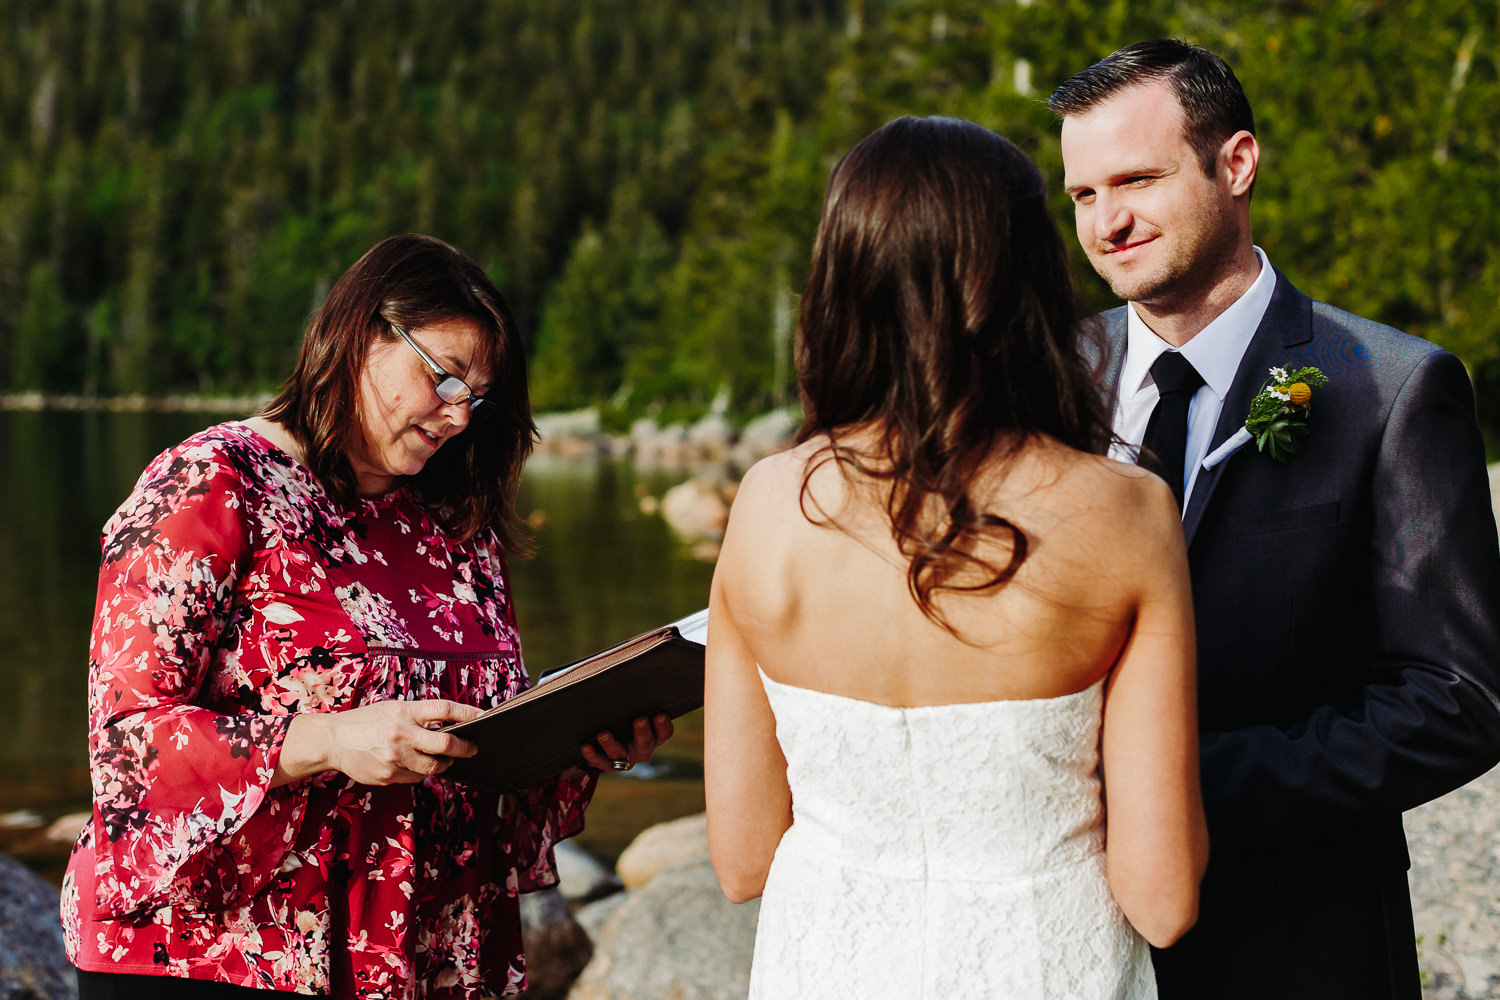 Groom smiling at bride during wedding ceremony in Acadia National Park